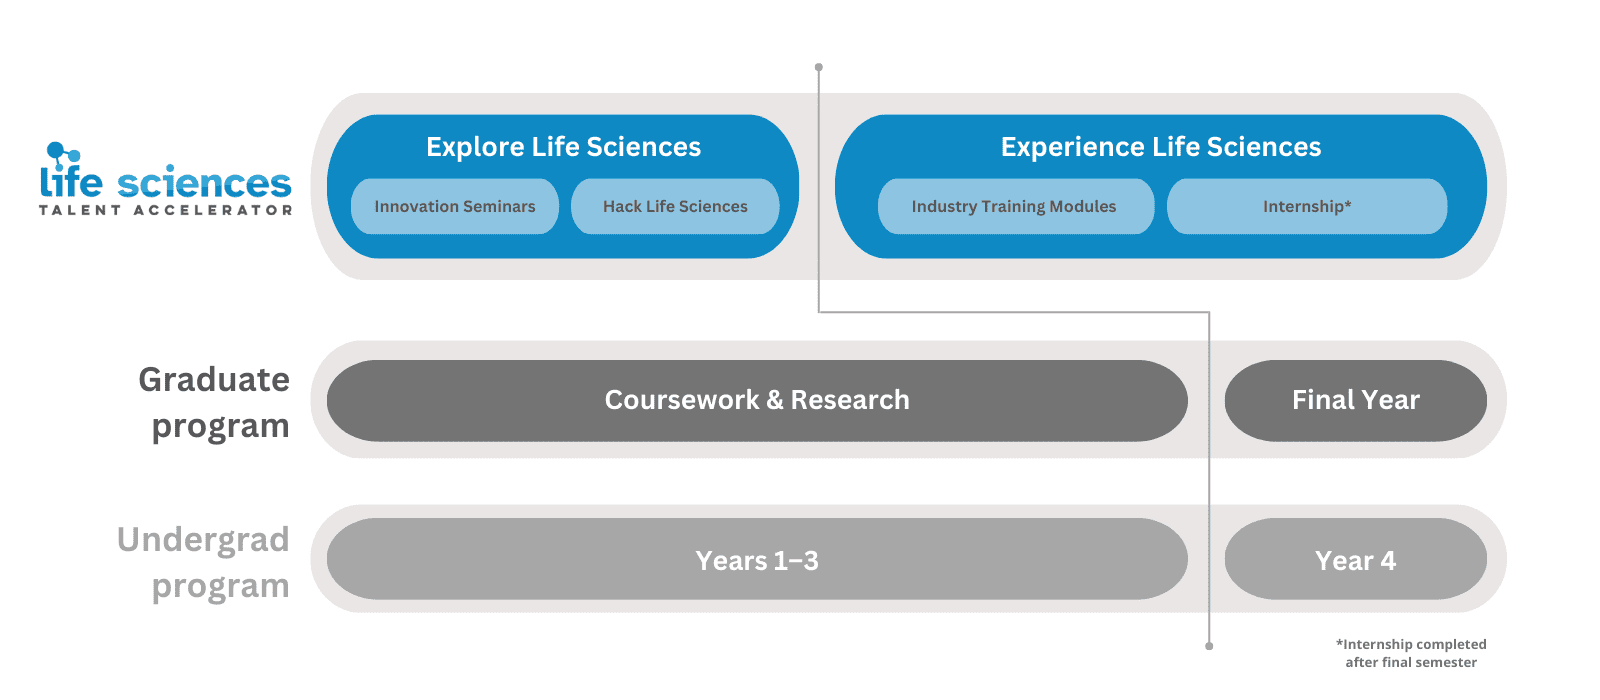 Life Sciences Program Eligibility Chart showing a fast track through graduate and undergrad programs